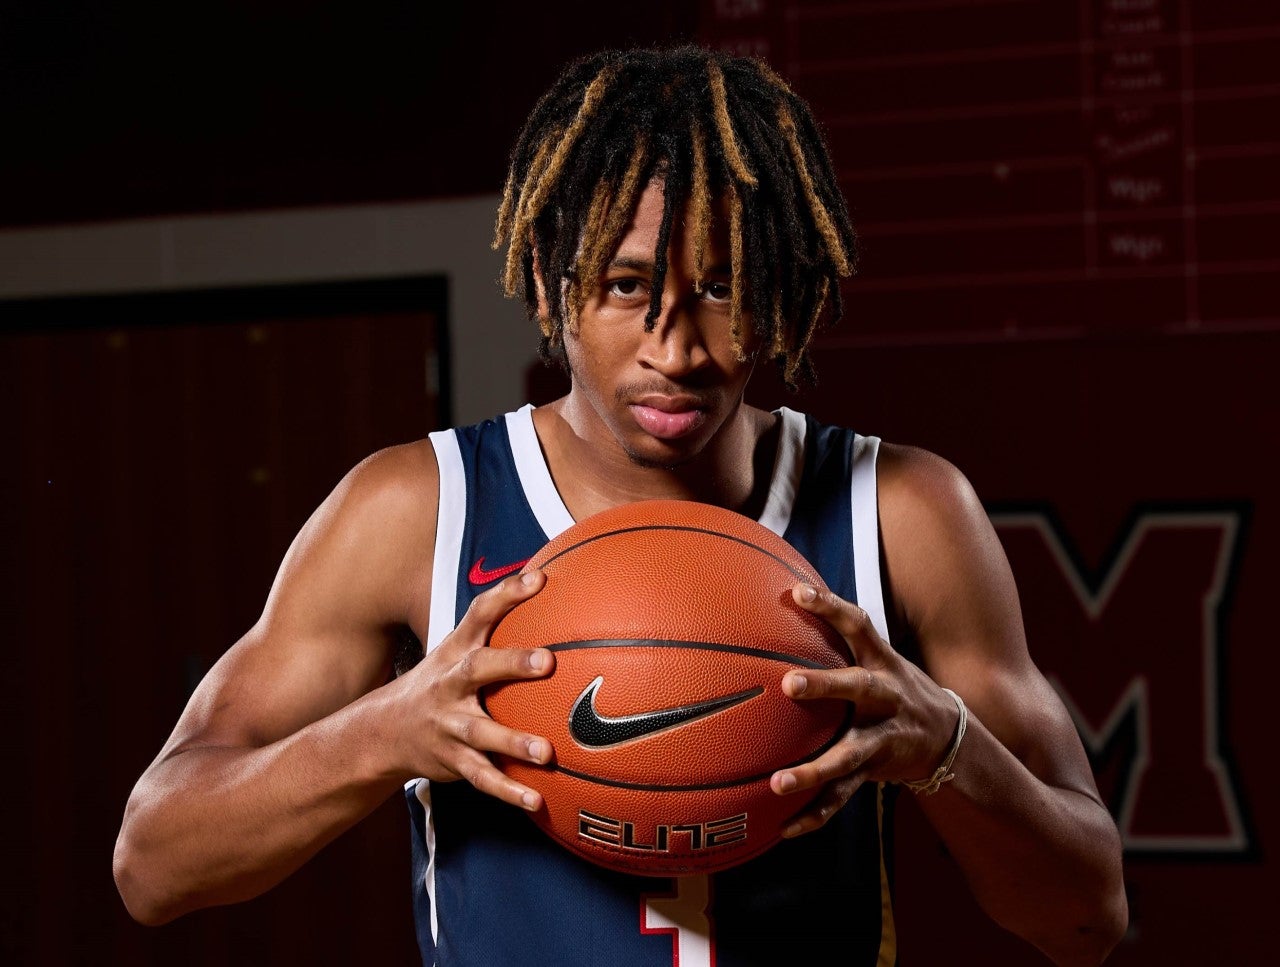 Mercy Miller, Master P's son, transfers to Oak Hill